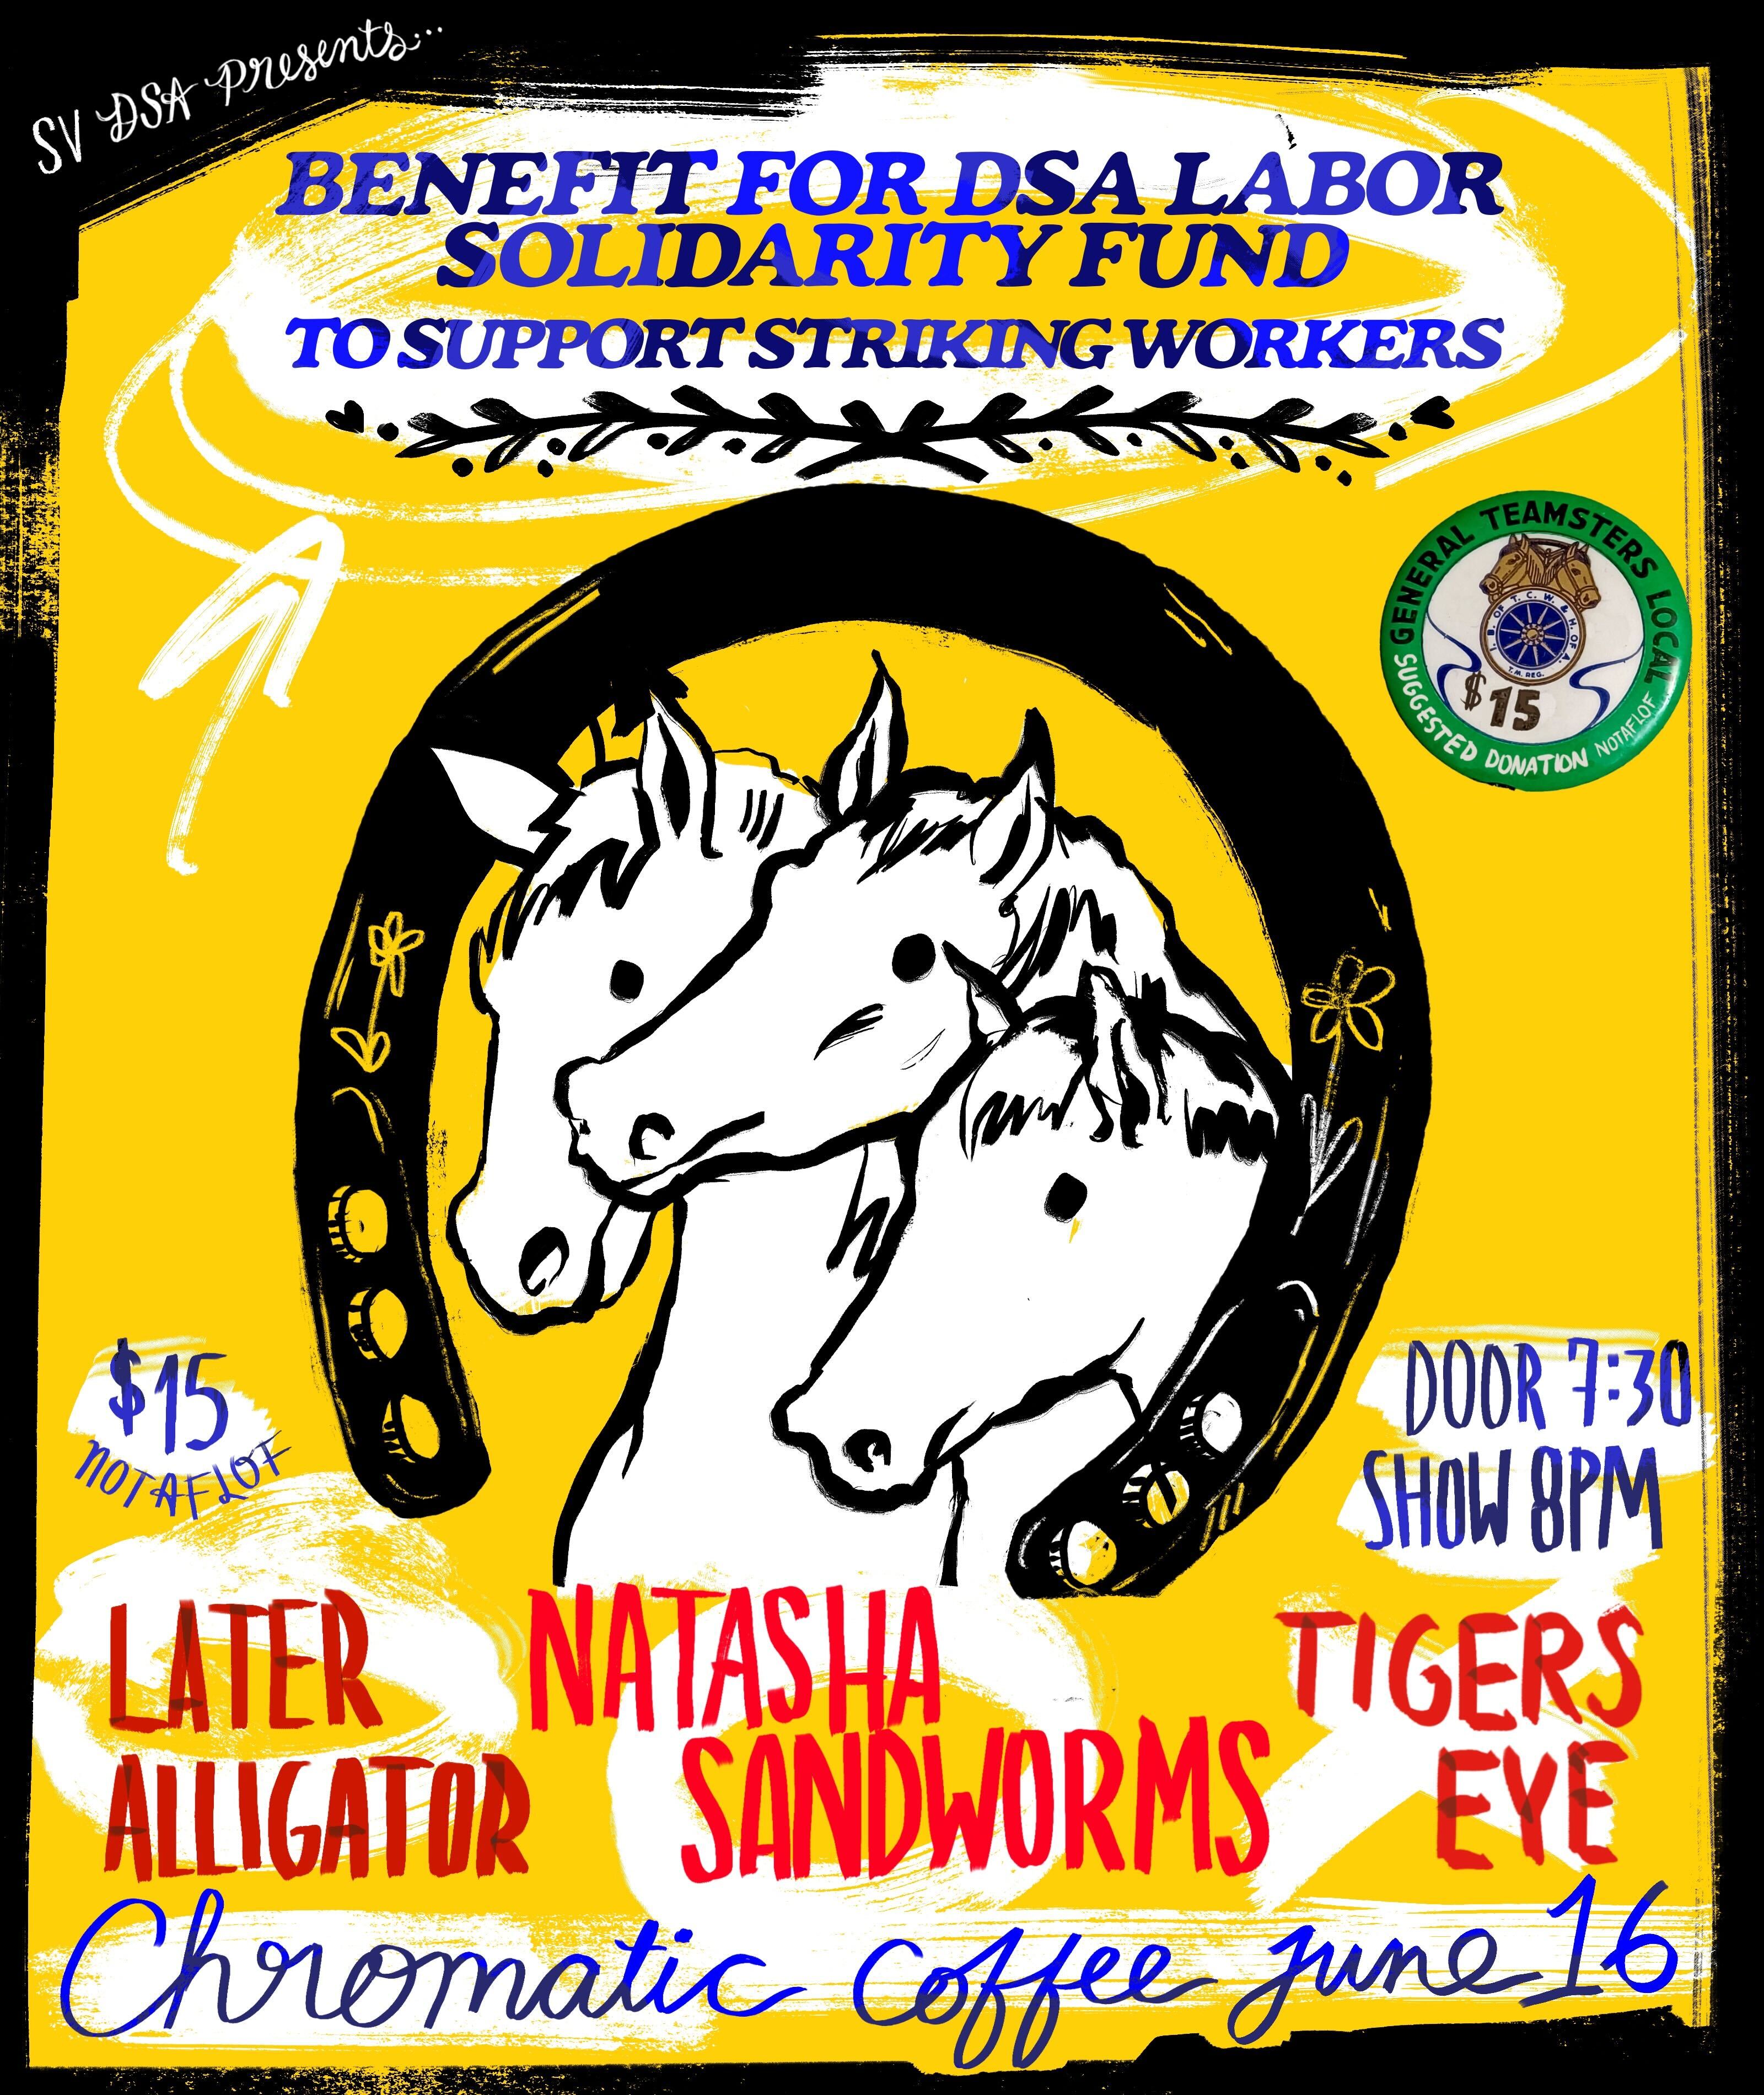 event flyer with illustration of three horse heads. SV DSA presents... Benefit for DSA Labor Solidarity Fund to support striking workers. $15 NOTAFLOF. Door 7:30. Show 8pm. Later Alligator, Natasha Sandworms, Tigers Eye. Chromatic Coffee. June 16.